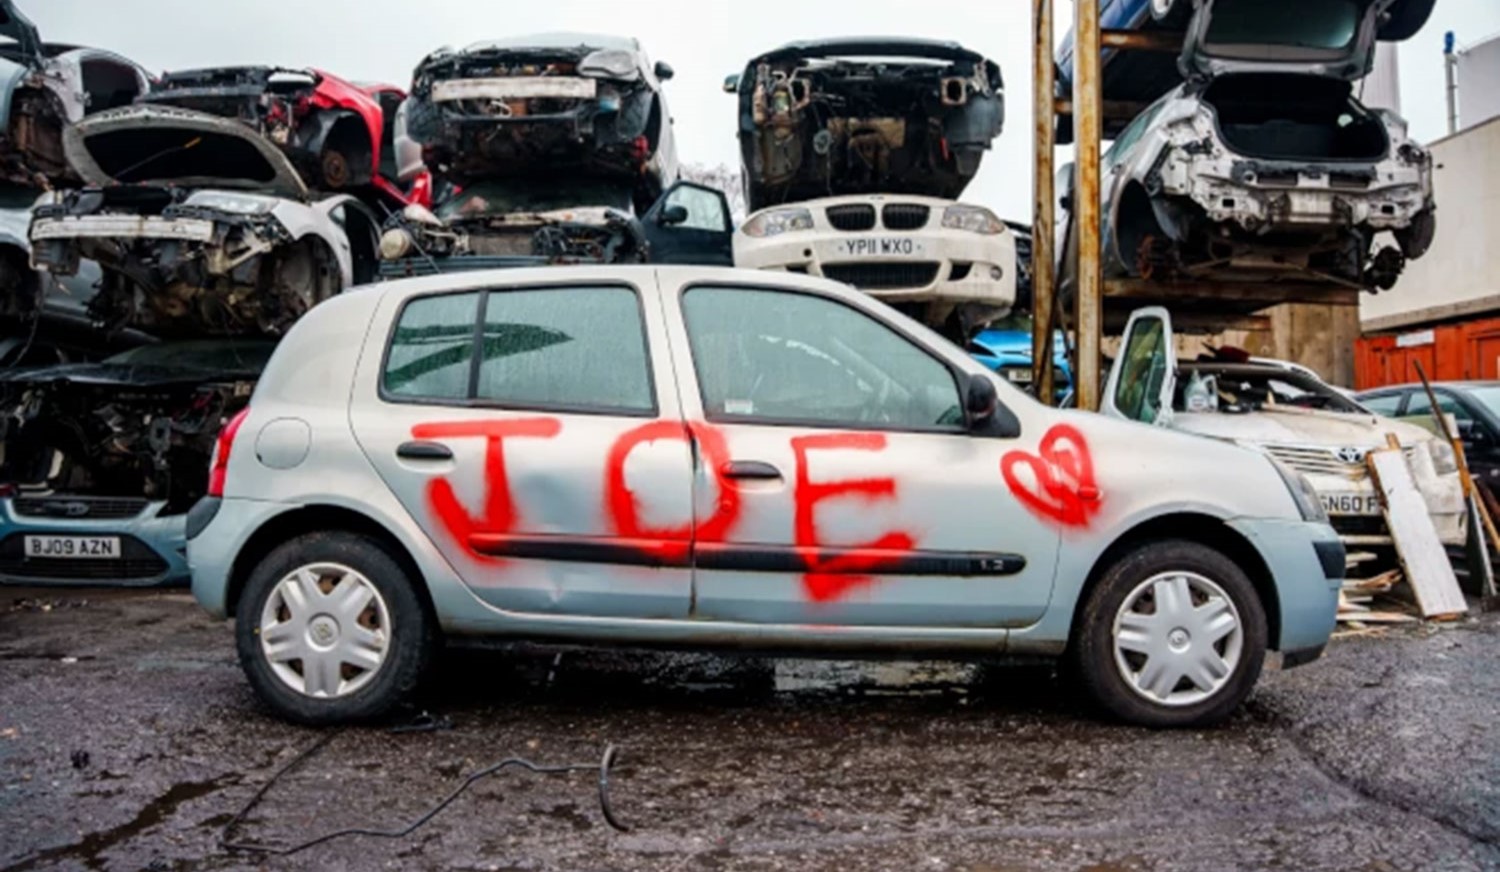 Turn Valentine's Day heartbreak into closure by dedicating a car to your ex, with their name spray-painted on it before it's crushed.